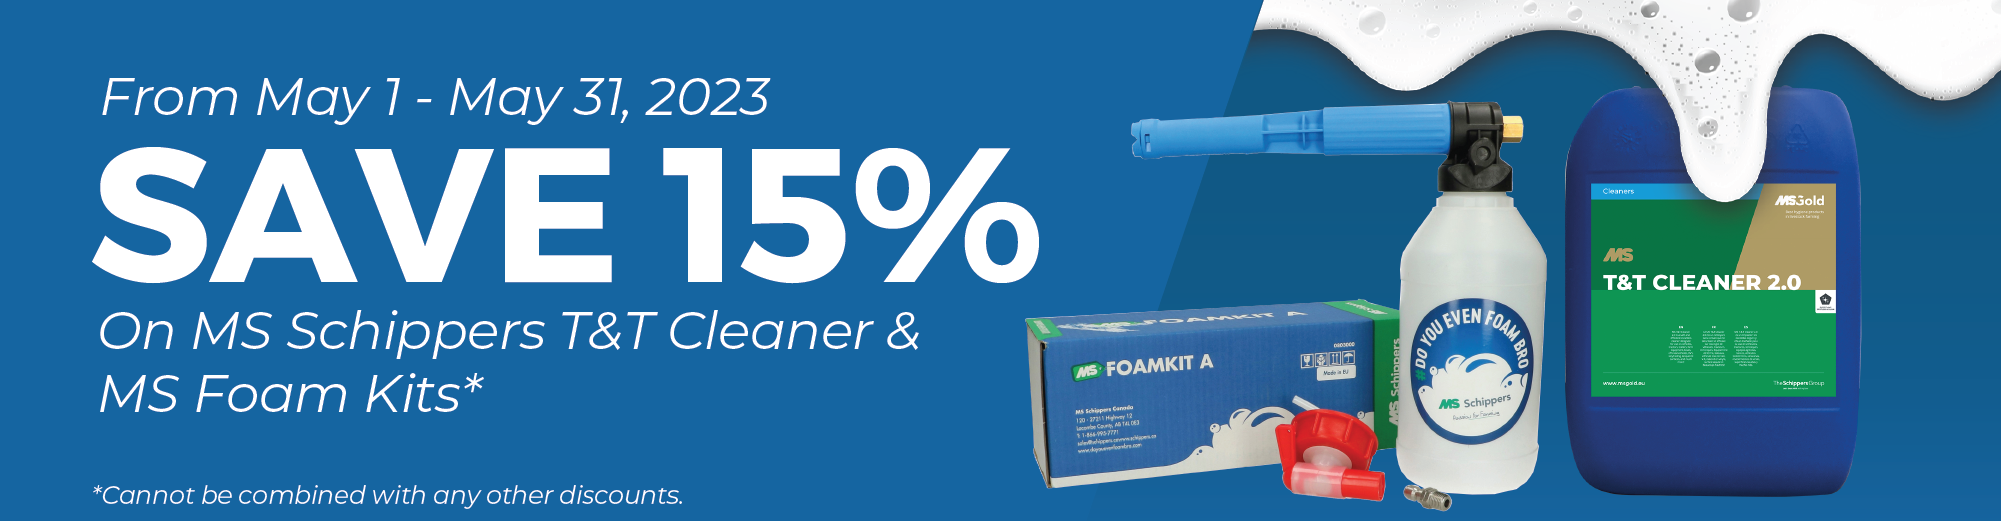 From May 1-31st, save 15% on MS T&T Cleaner and Foam Kits